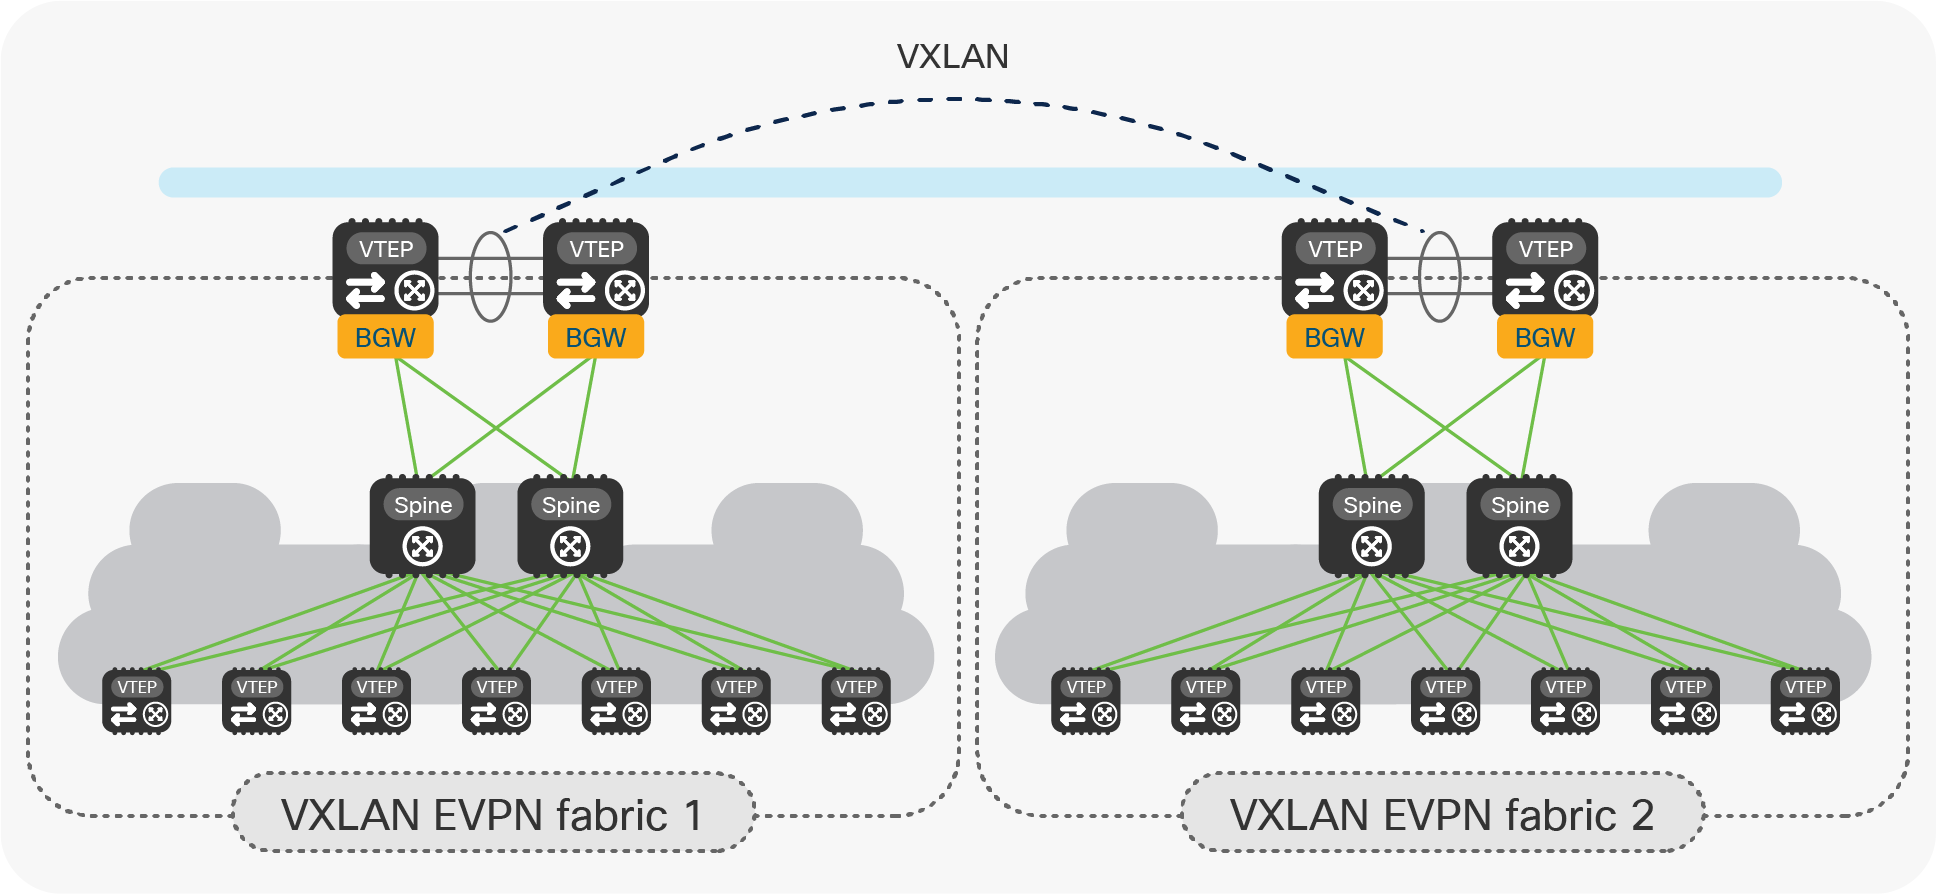 End state of the legacy data center migration to VXLAN EVPN fabrics with vPC BGW nodes